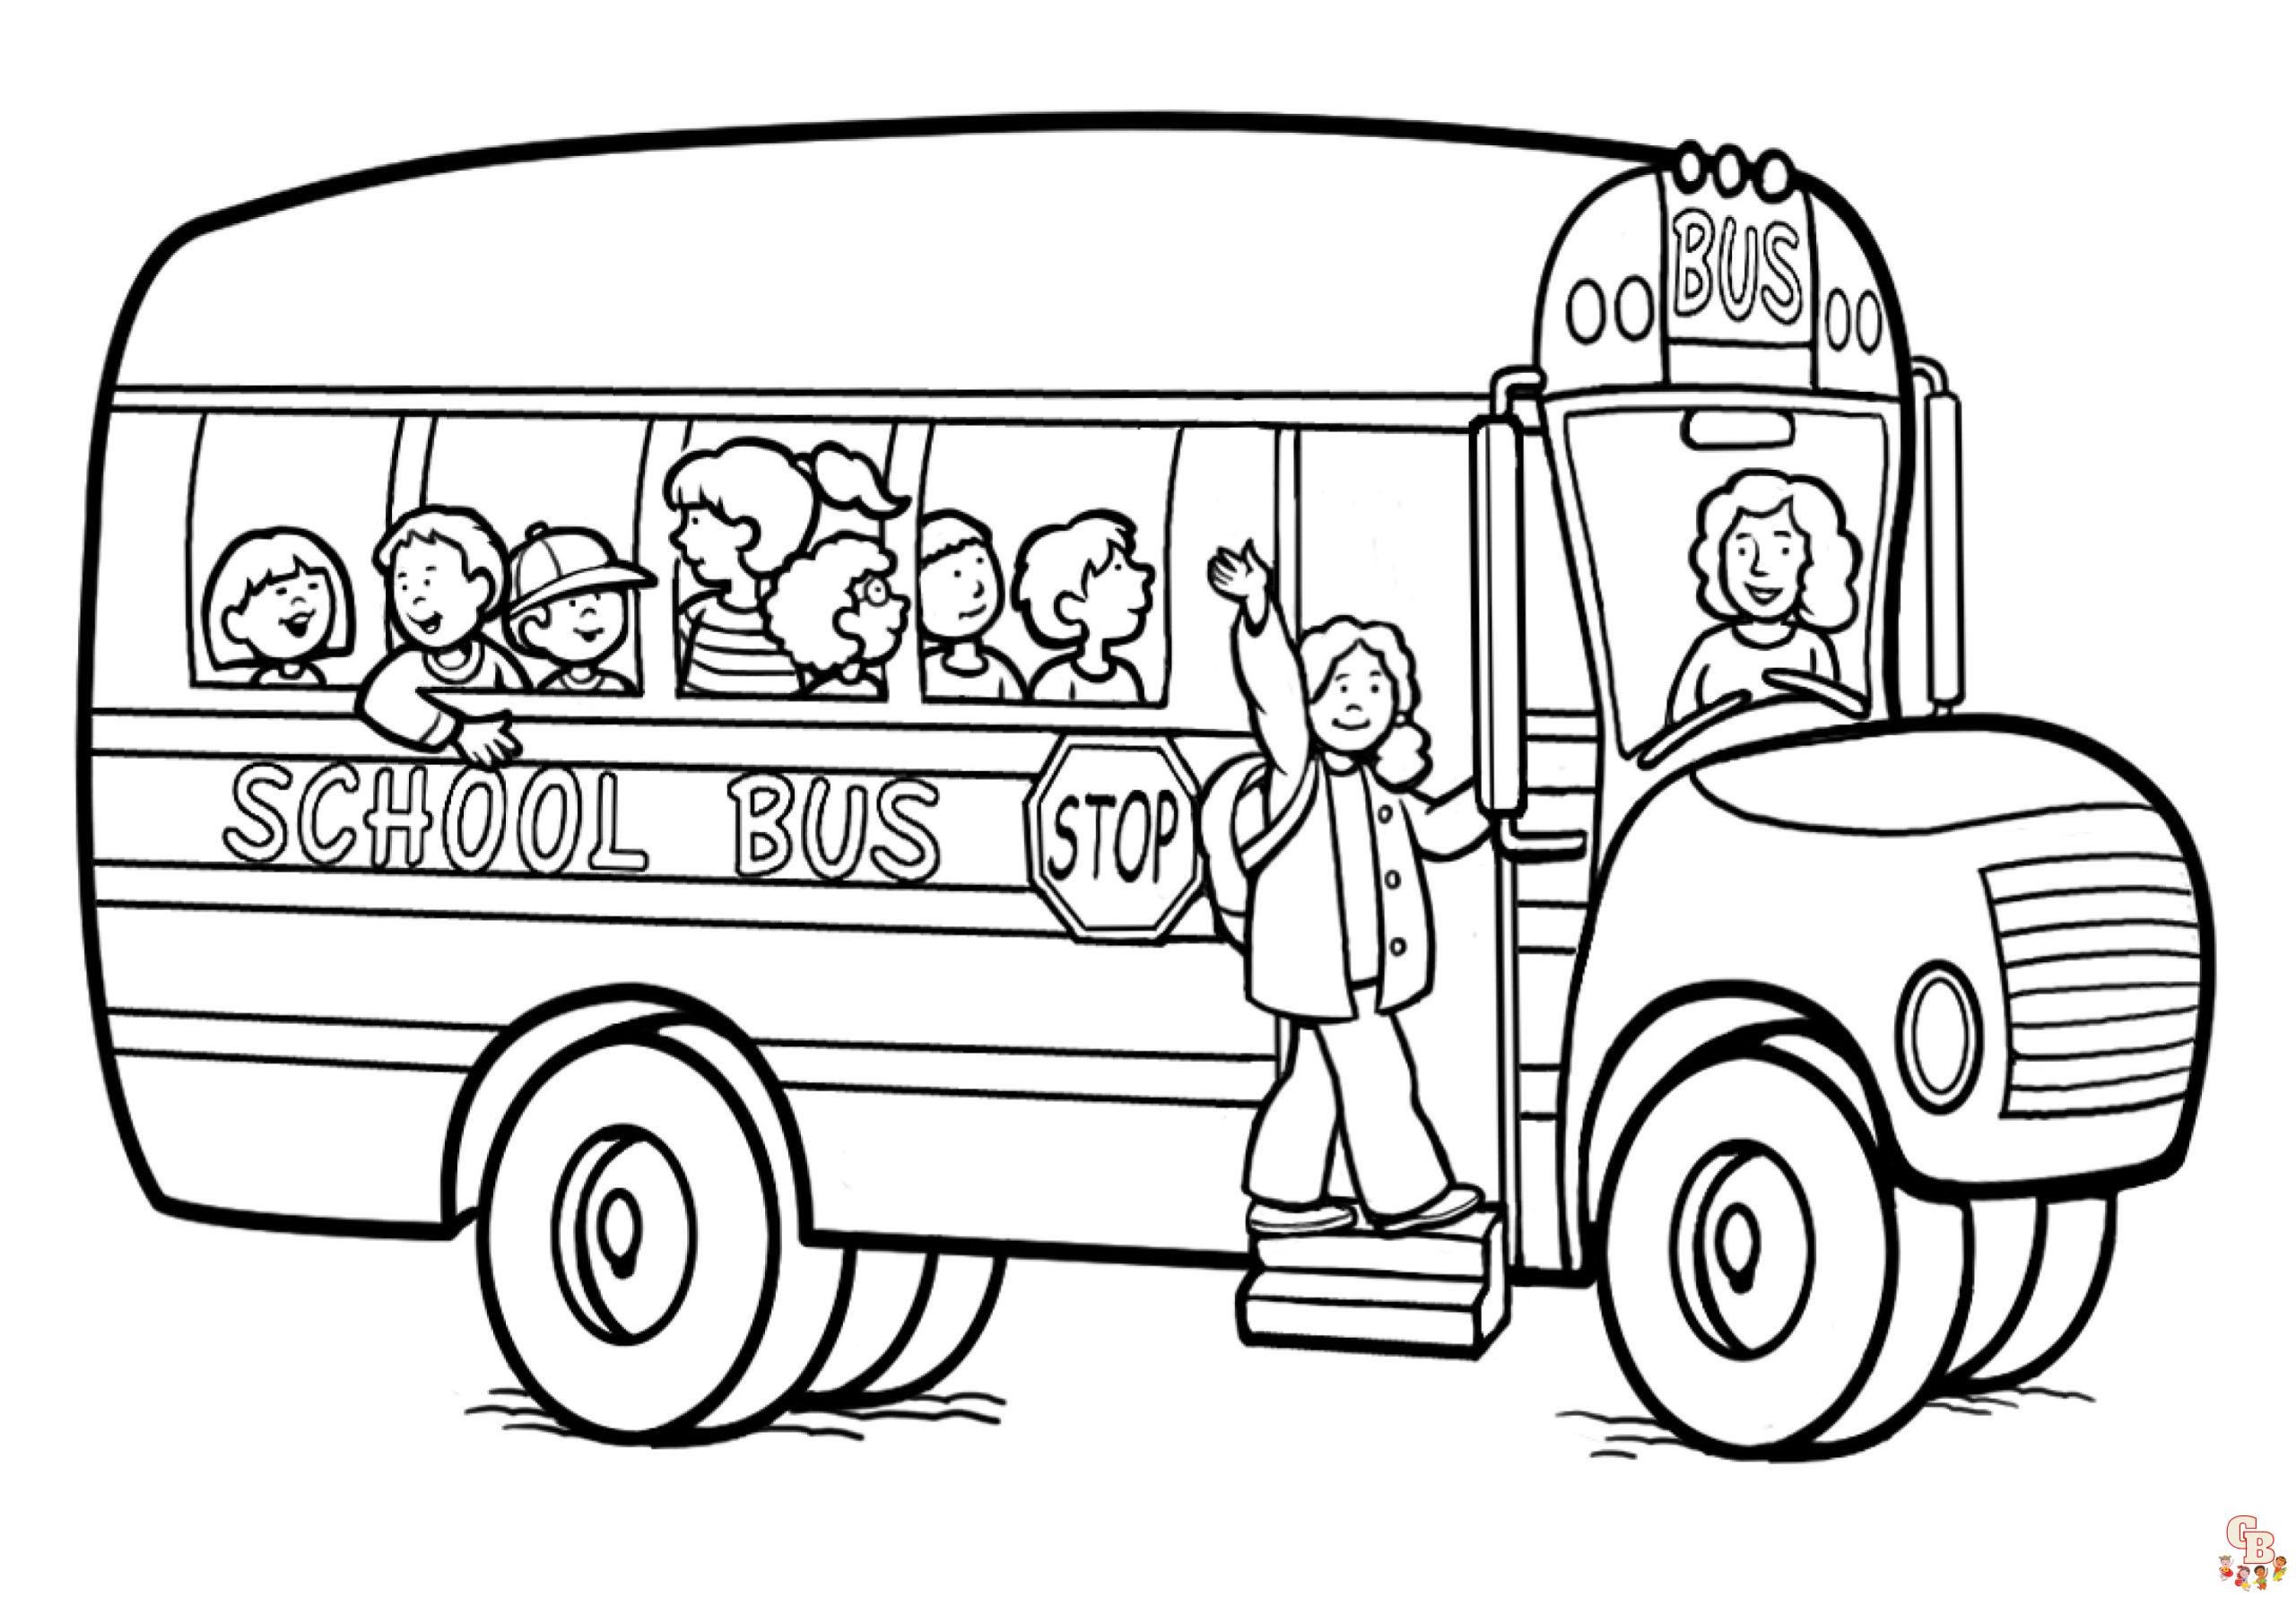 Fun and creative bus coloring pages for kids